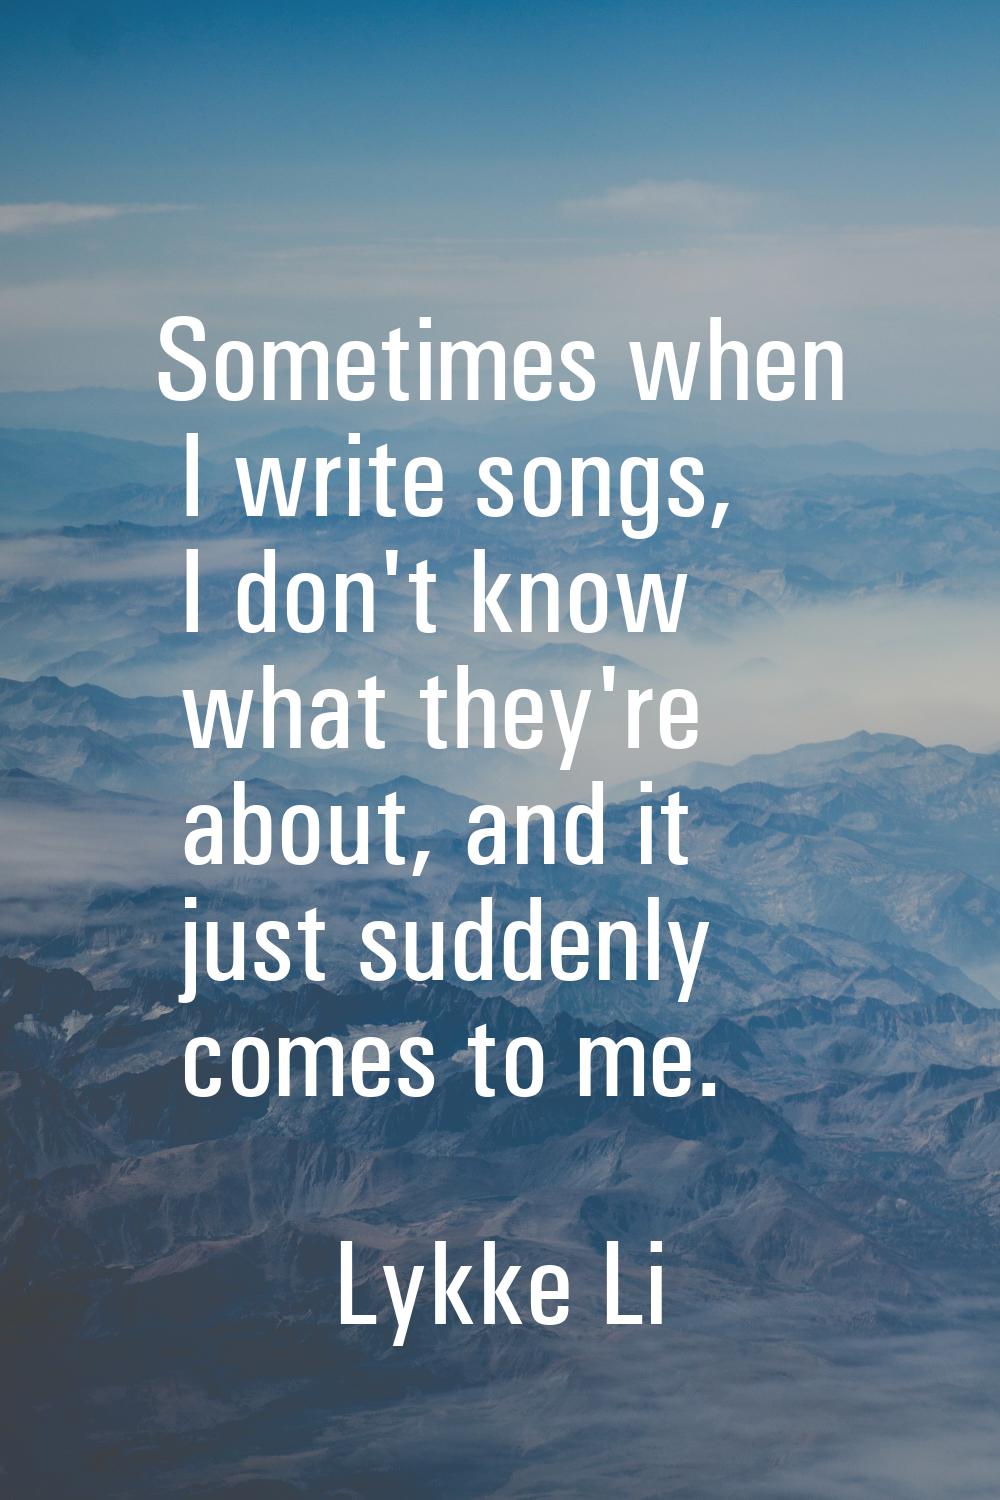 Sometimes when I write songs, I don't know what they're about, and it just suddenly comes to me.